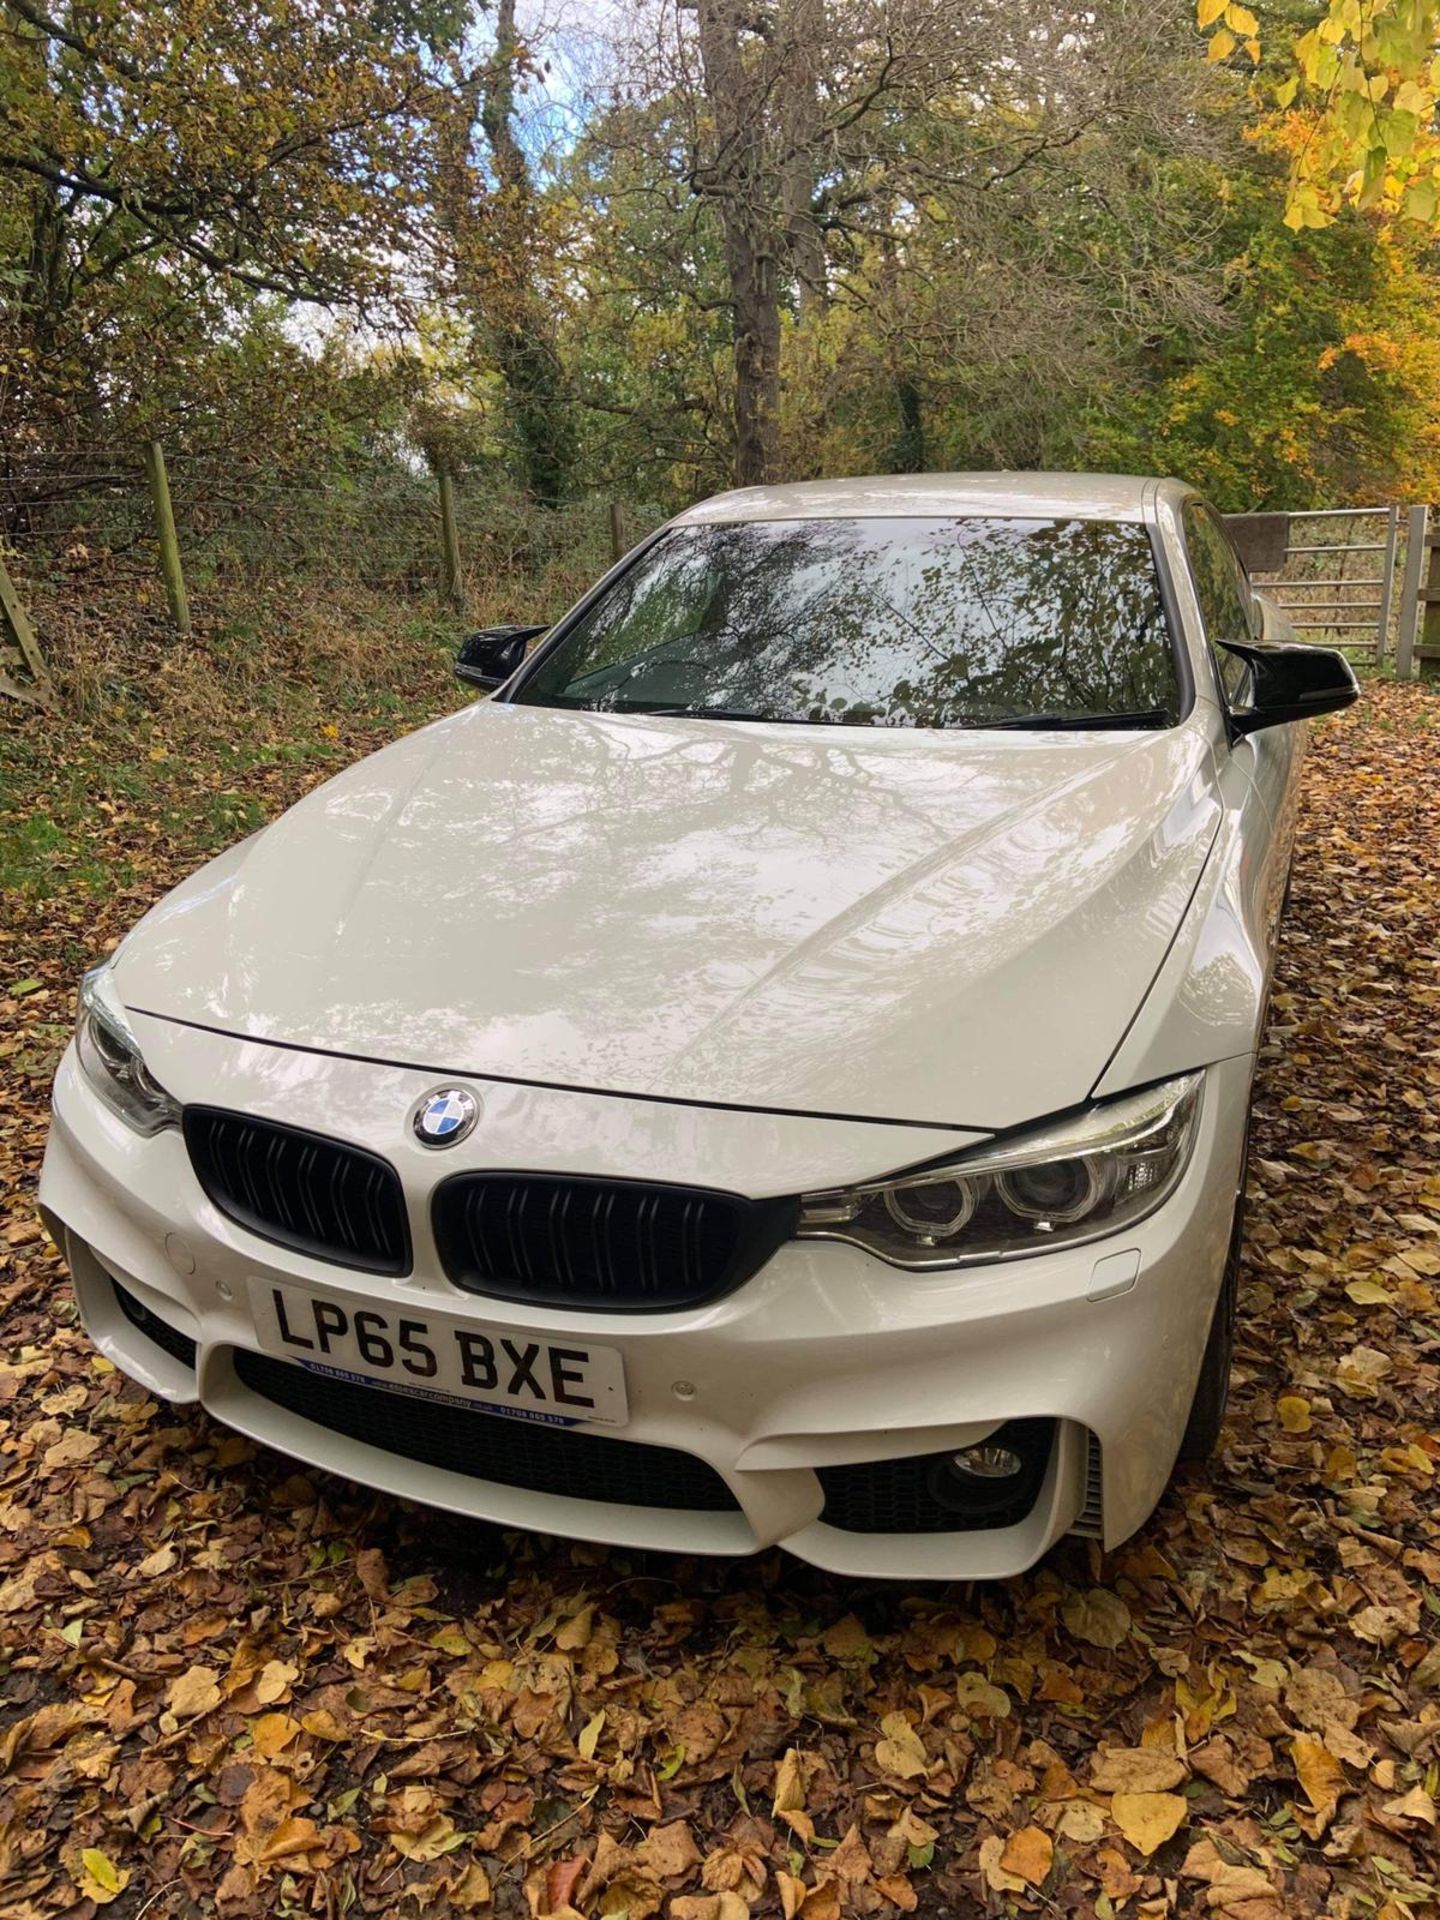 2015/65 REG BMW 420D M SPORT 2.0 DIESEL AUTOMATIC WHITE COUPE, SHOWING 2 FORMER KEEPERS *NO VAT* - Image 3 of 14